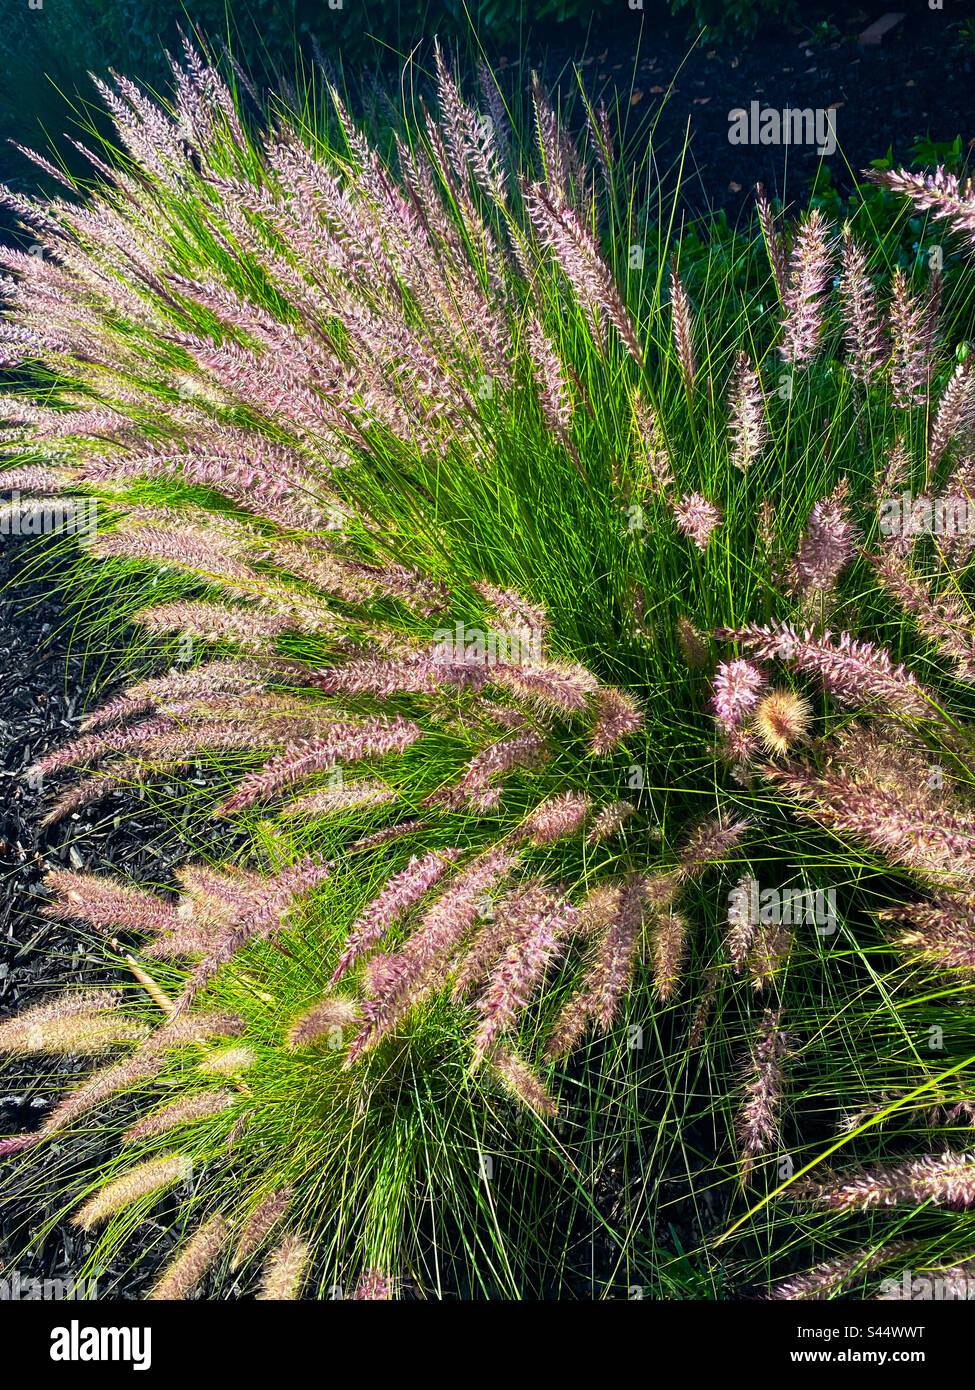 Grass with seed heads Stock Photo - Alamy